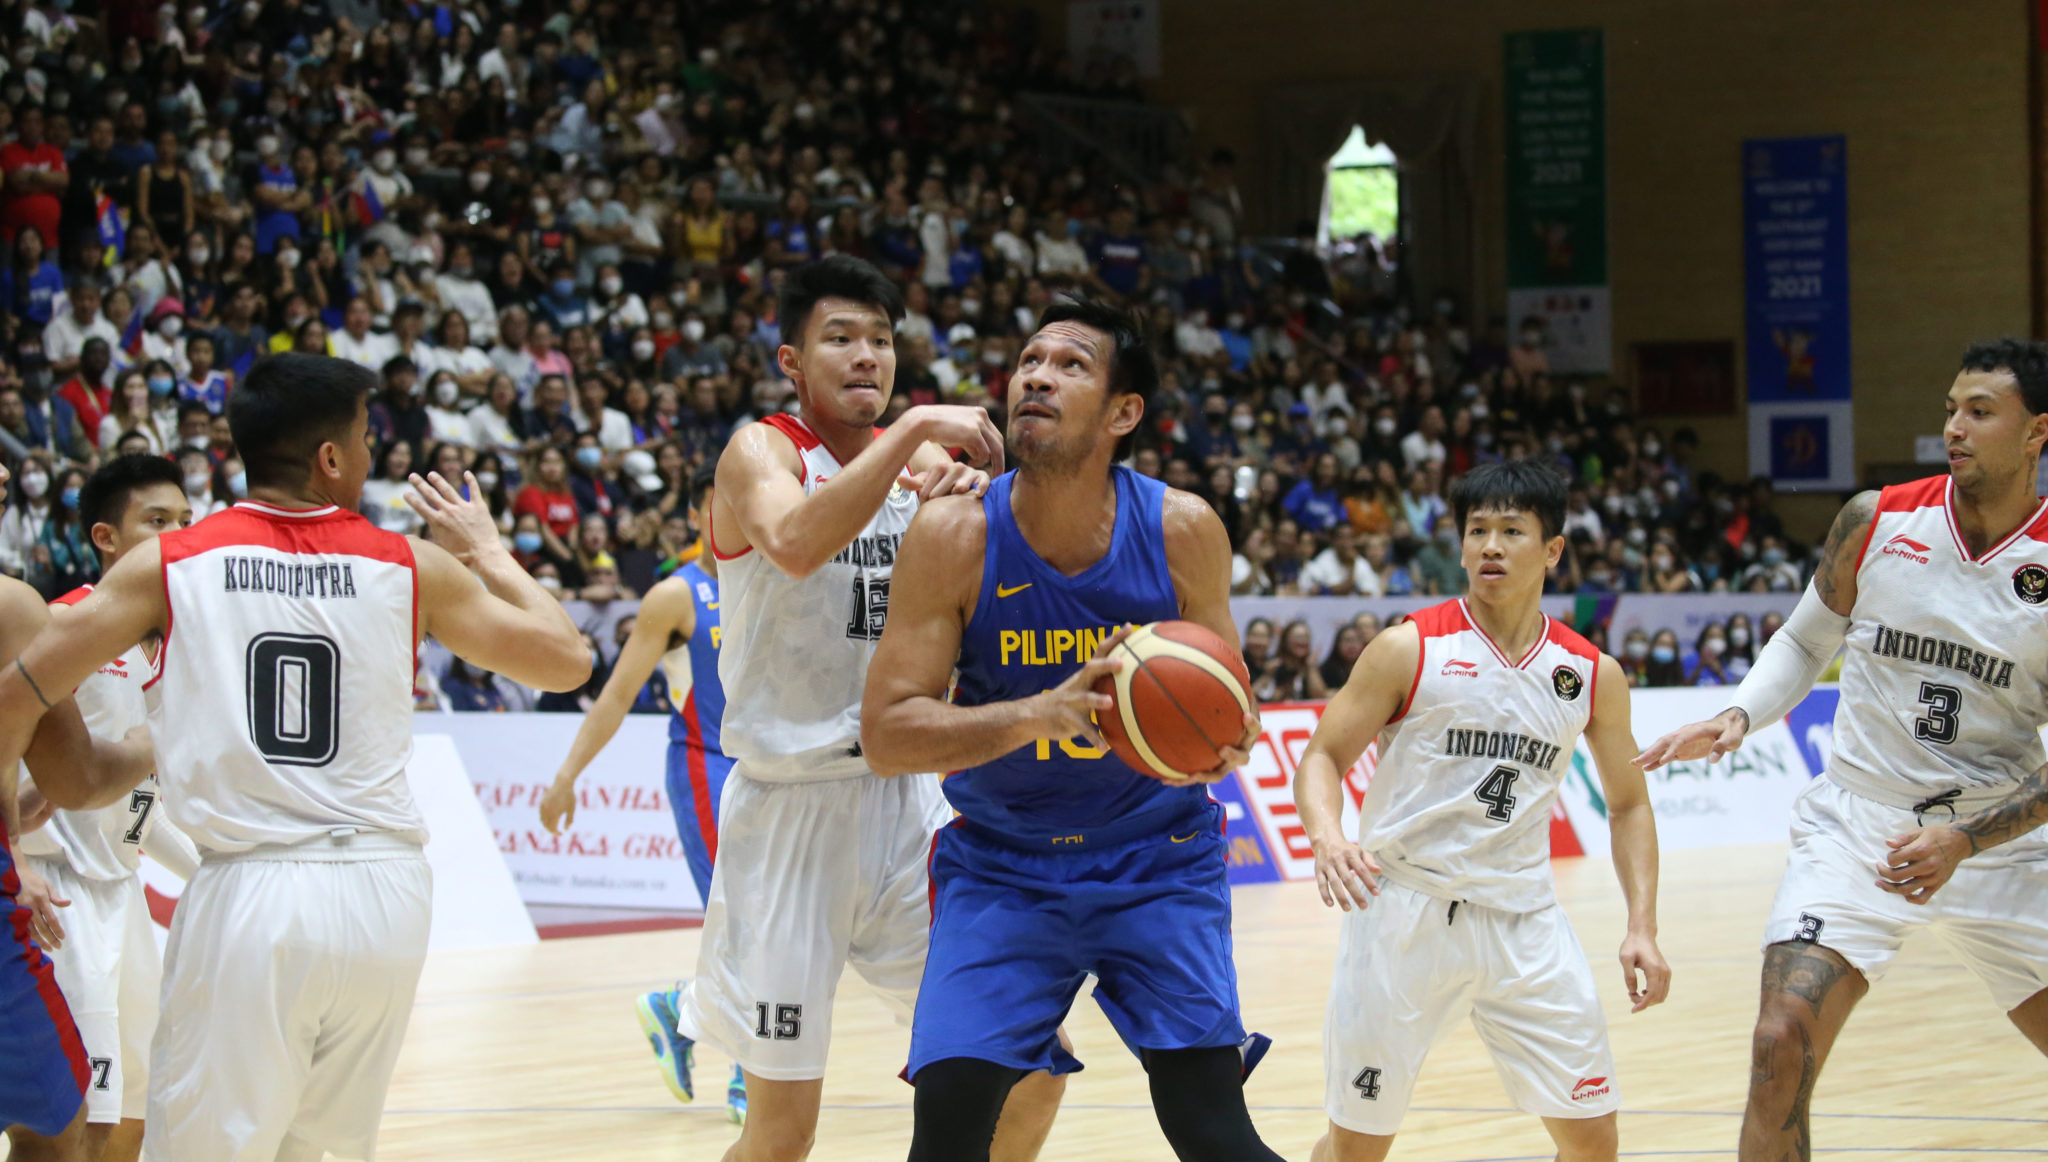 SEA Games Gilas Pilipinas' reign ends as Indonesia gets basketball